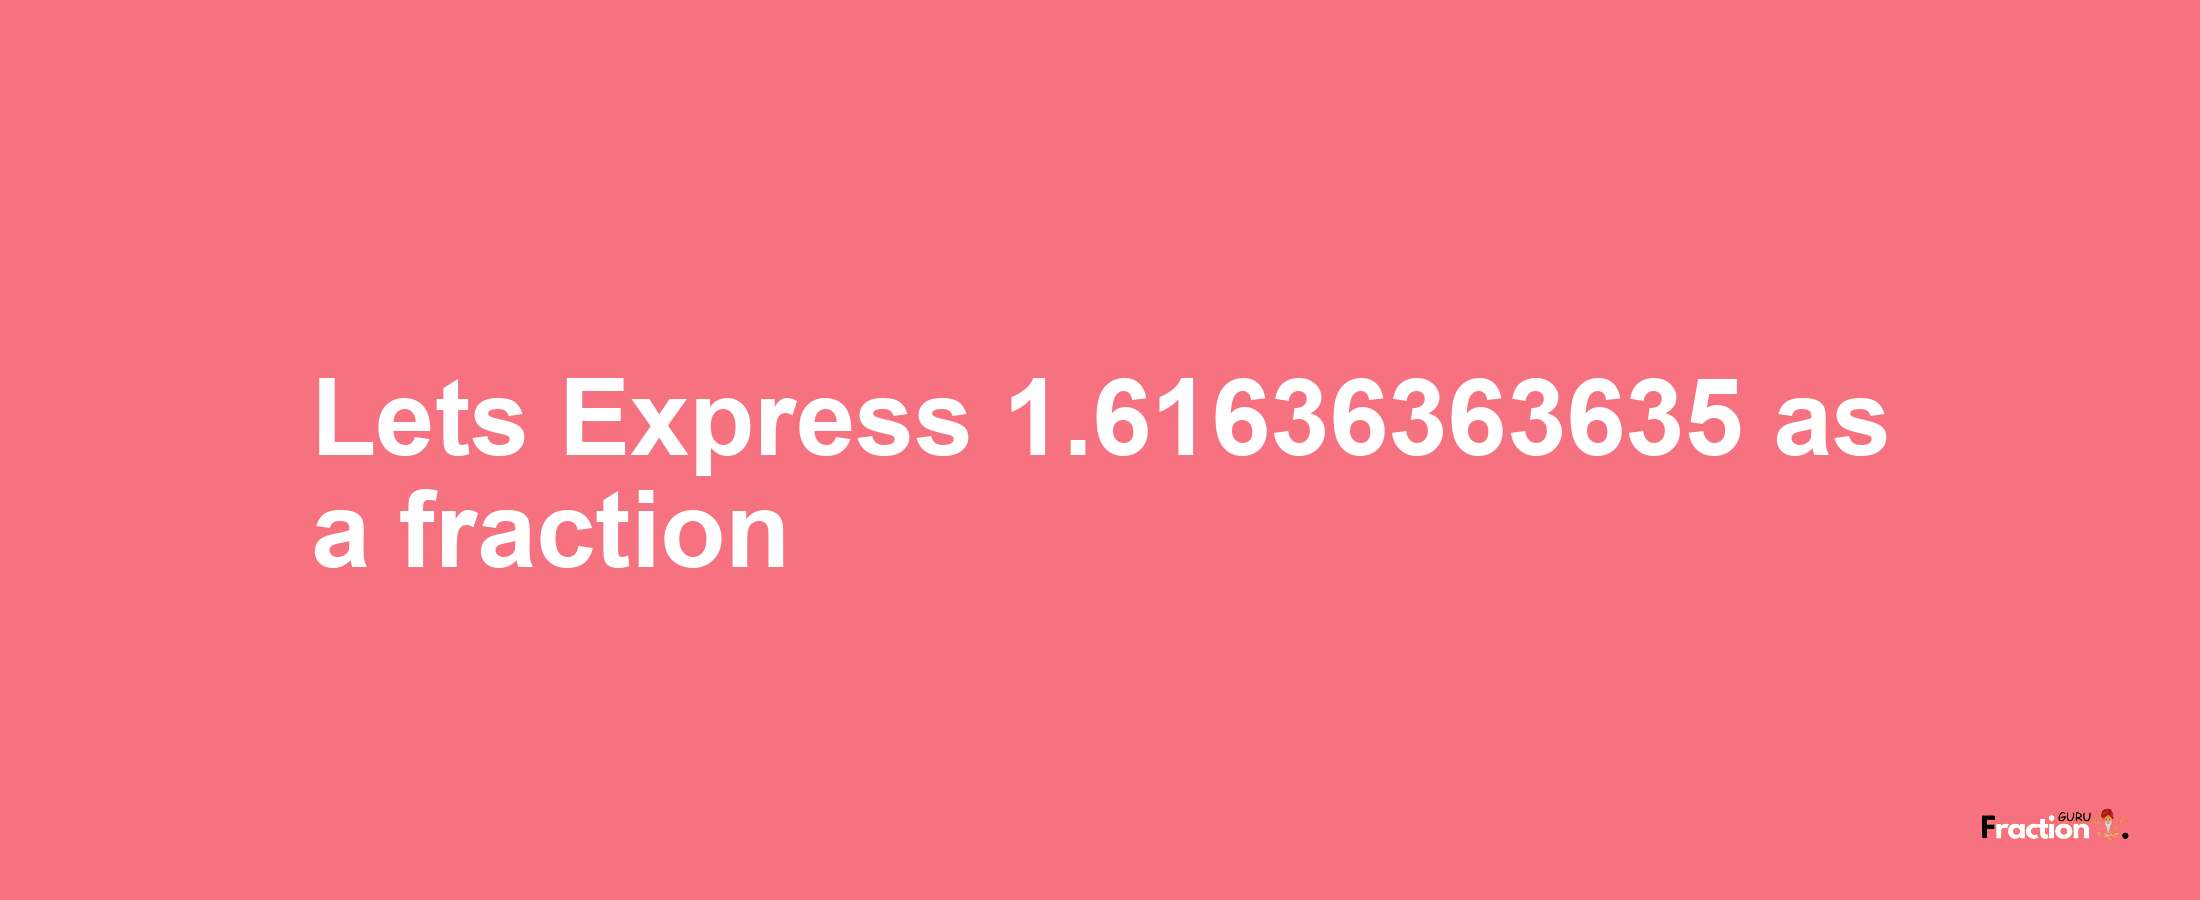 Lets Express 1.61636363635 as afraction